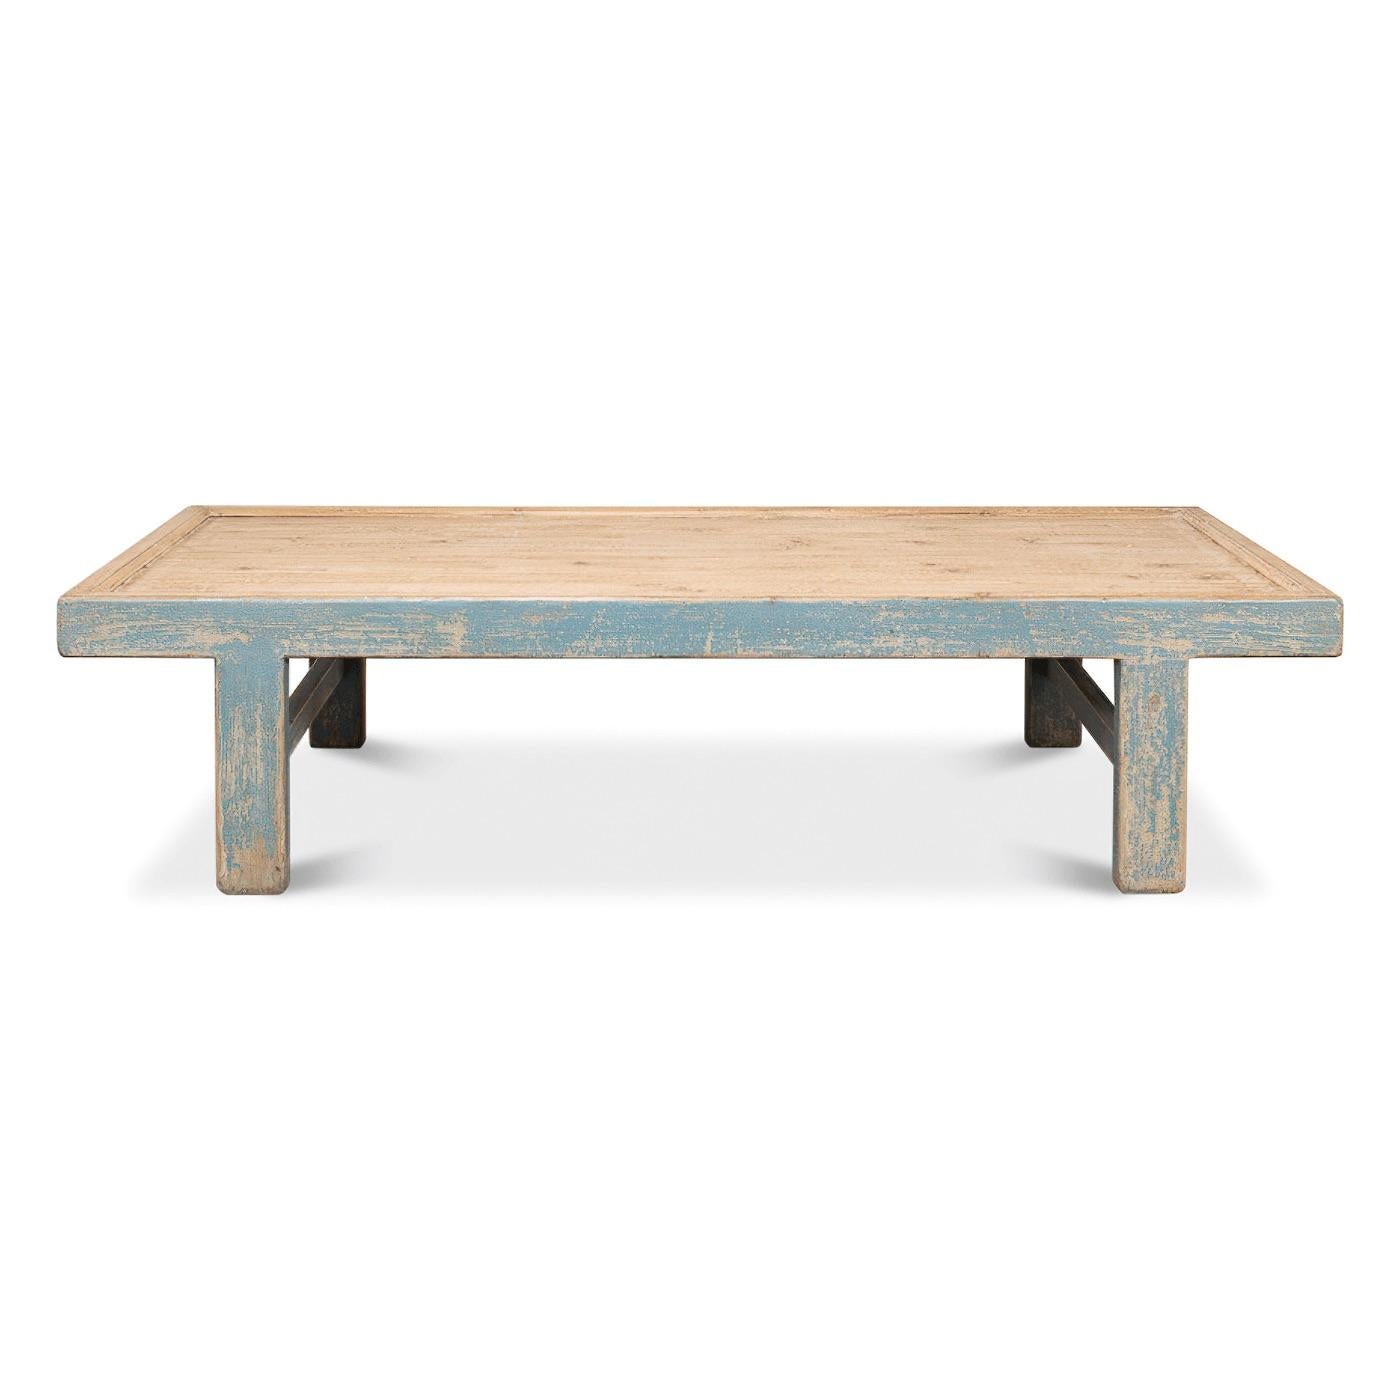 An antiqued blue rustic-style coffee table with a distressed finish. This beautiful coffee table with its distressed finish is full of rustic charm. Clean lines and a large tabletop make it the perfect coffee table to complete your living